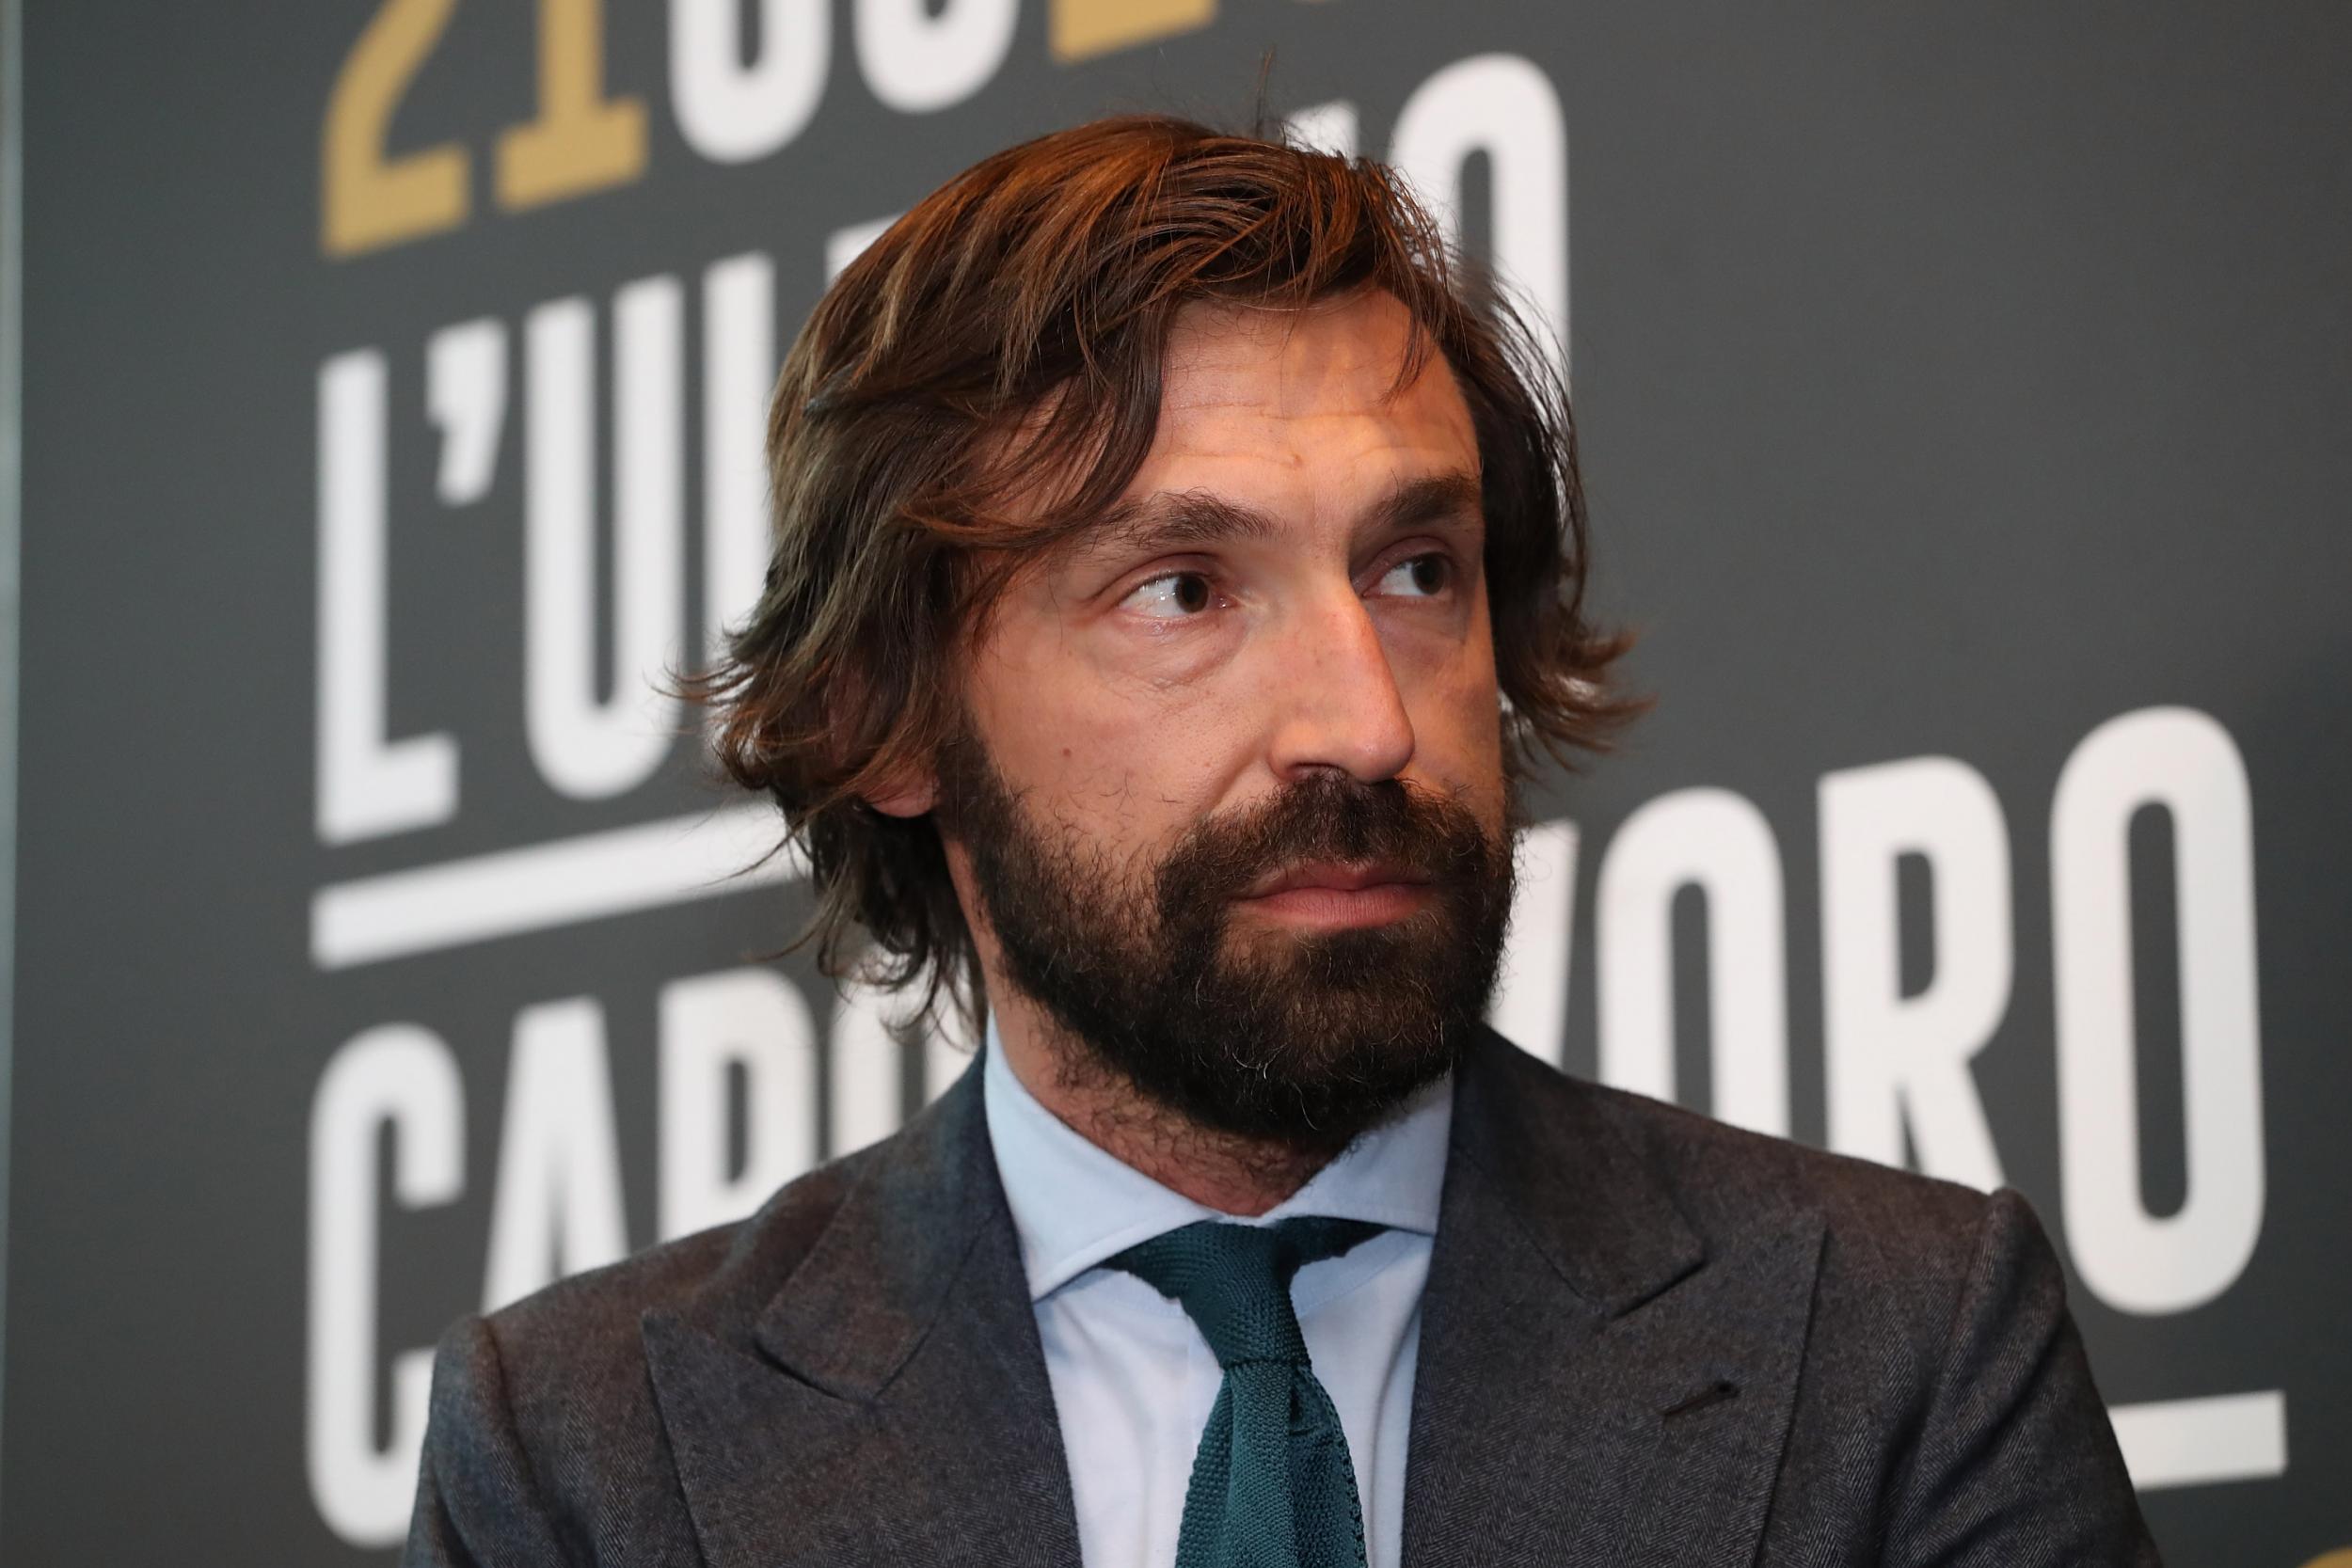 Andrea Pirlo: Juventus hire club legend to replace Maurizio Sarri as manager